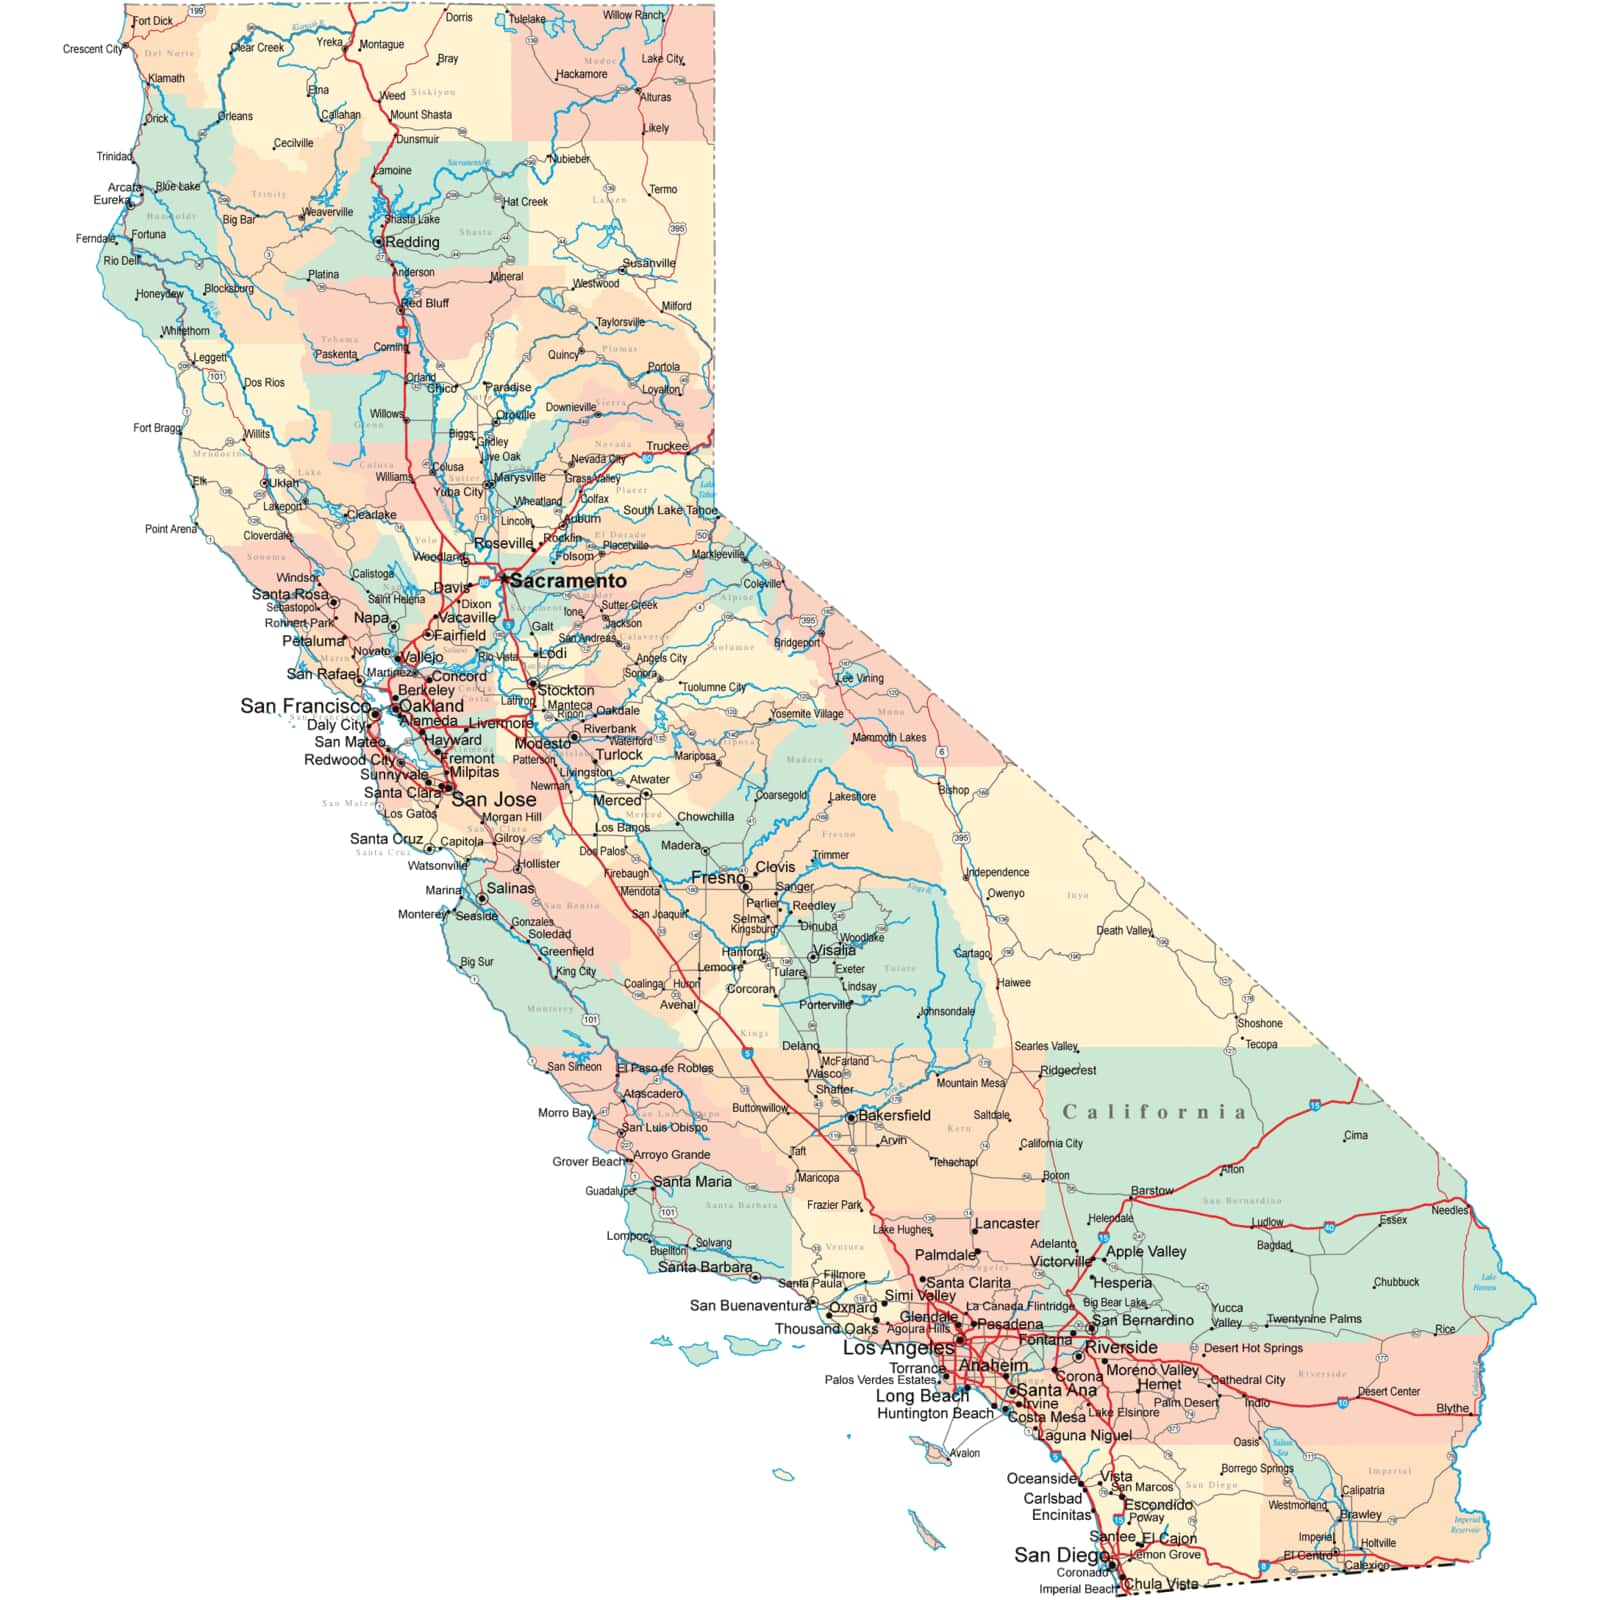 California Highway Map With Cities California Road Map   CA Road Map   California Highway Map